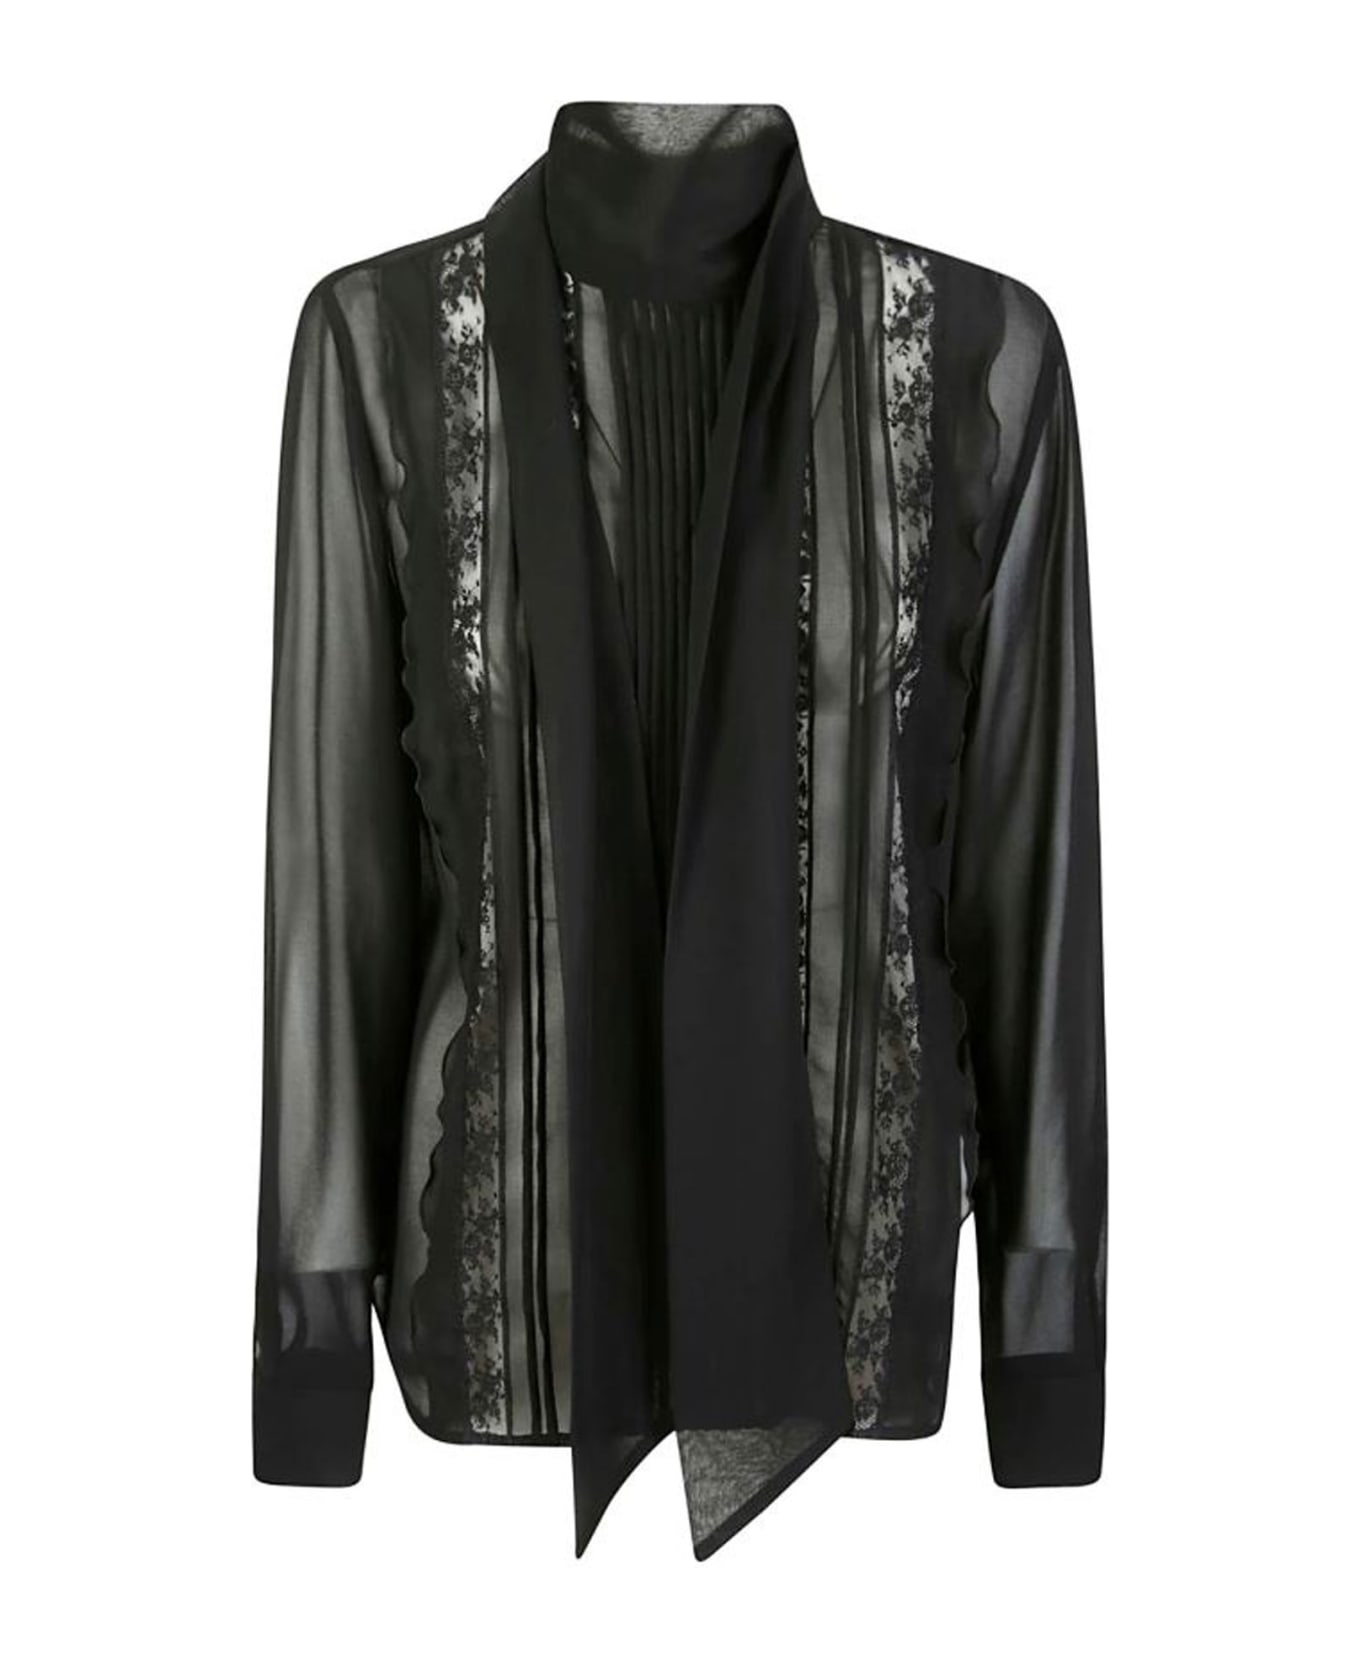 Parosh Black Shirt With Embroidery And Transparency - NERO